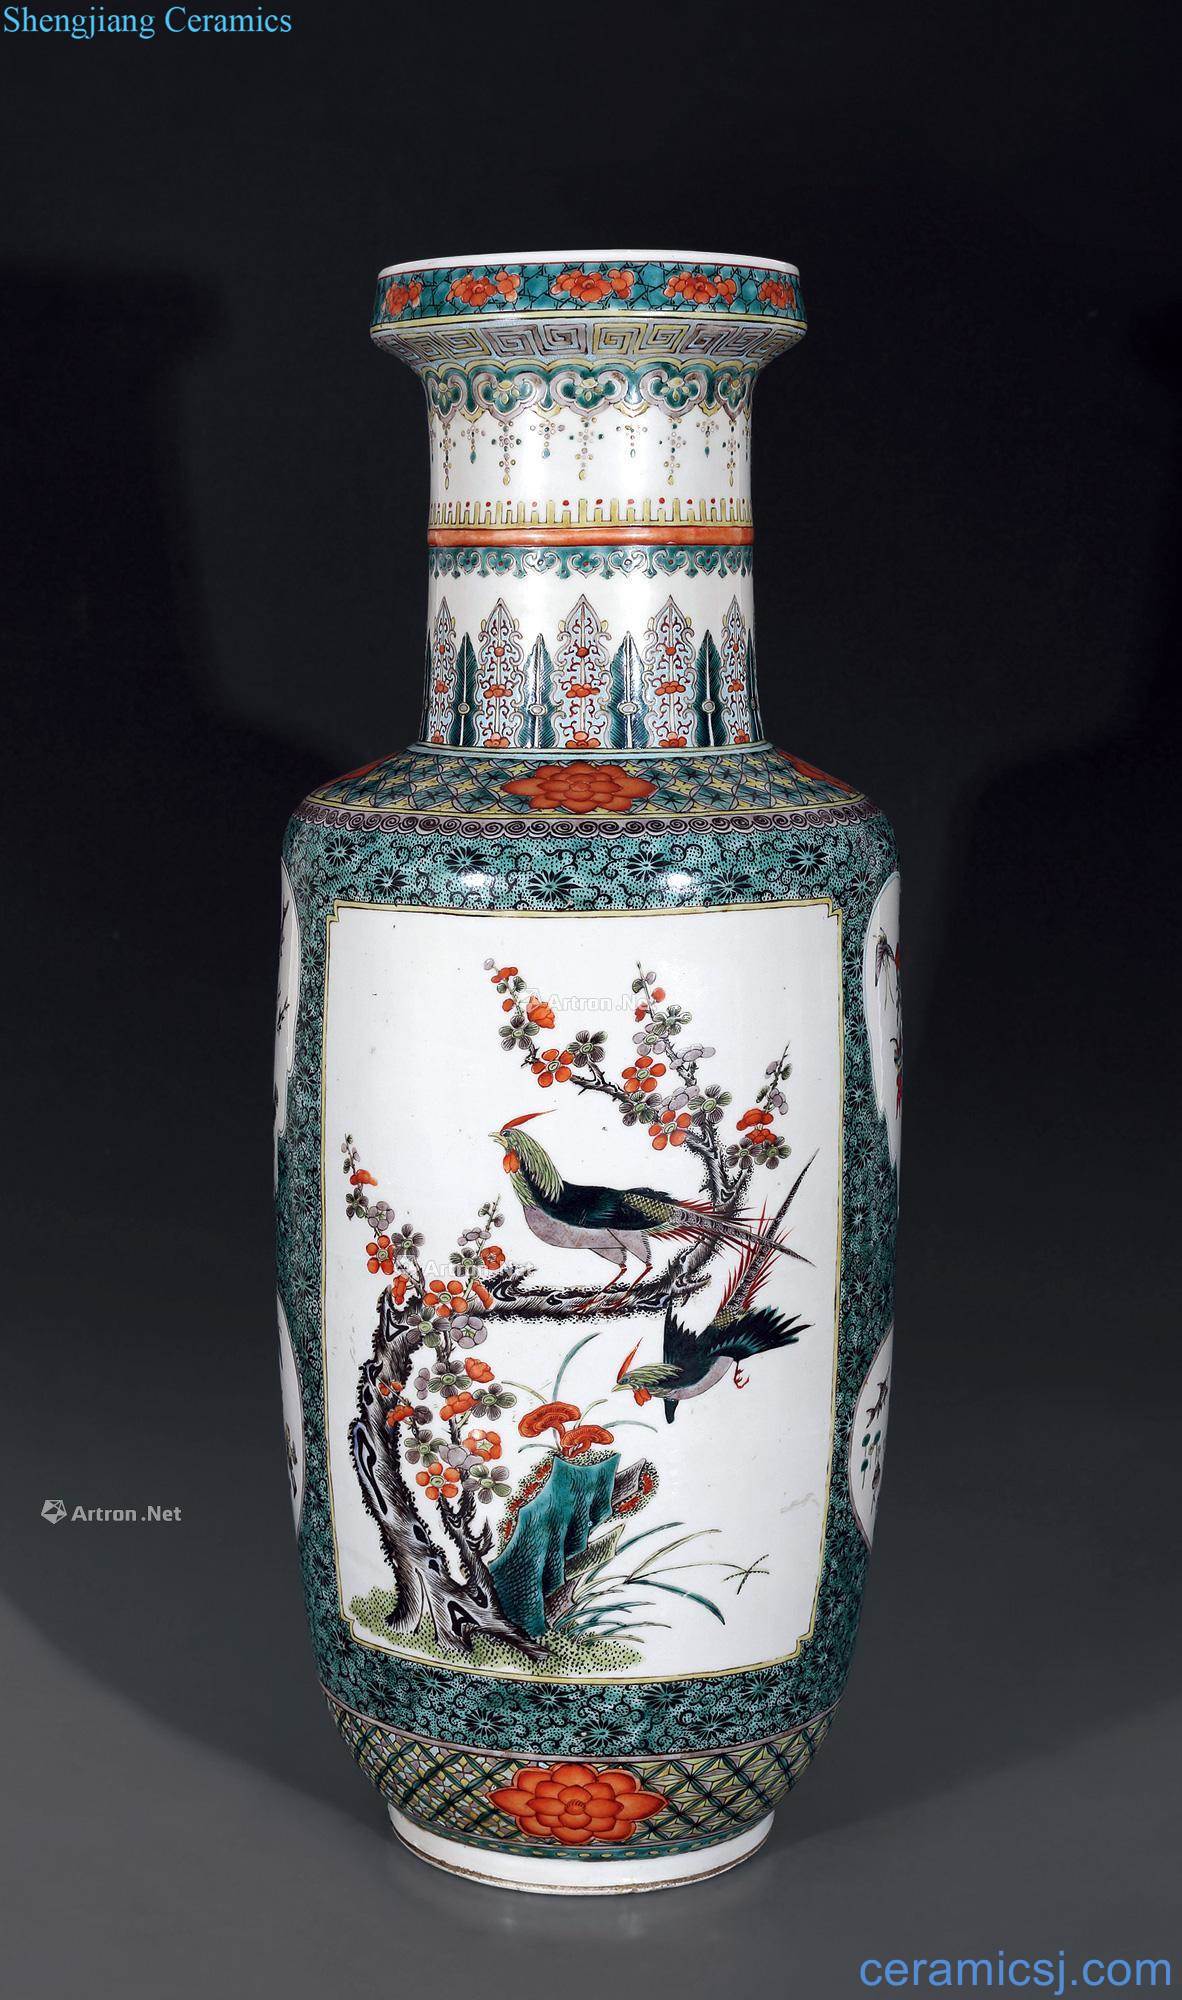 Qing medallion flower-and-bird lines were bottles of colorful brocade